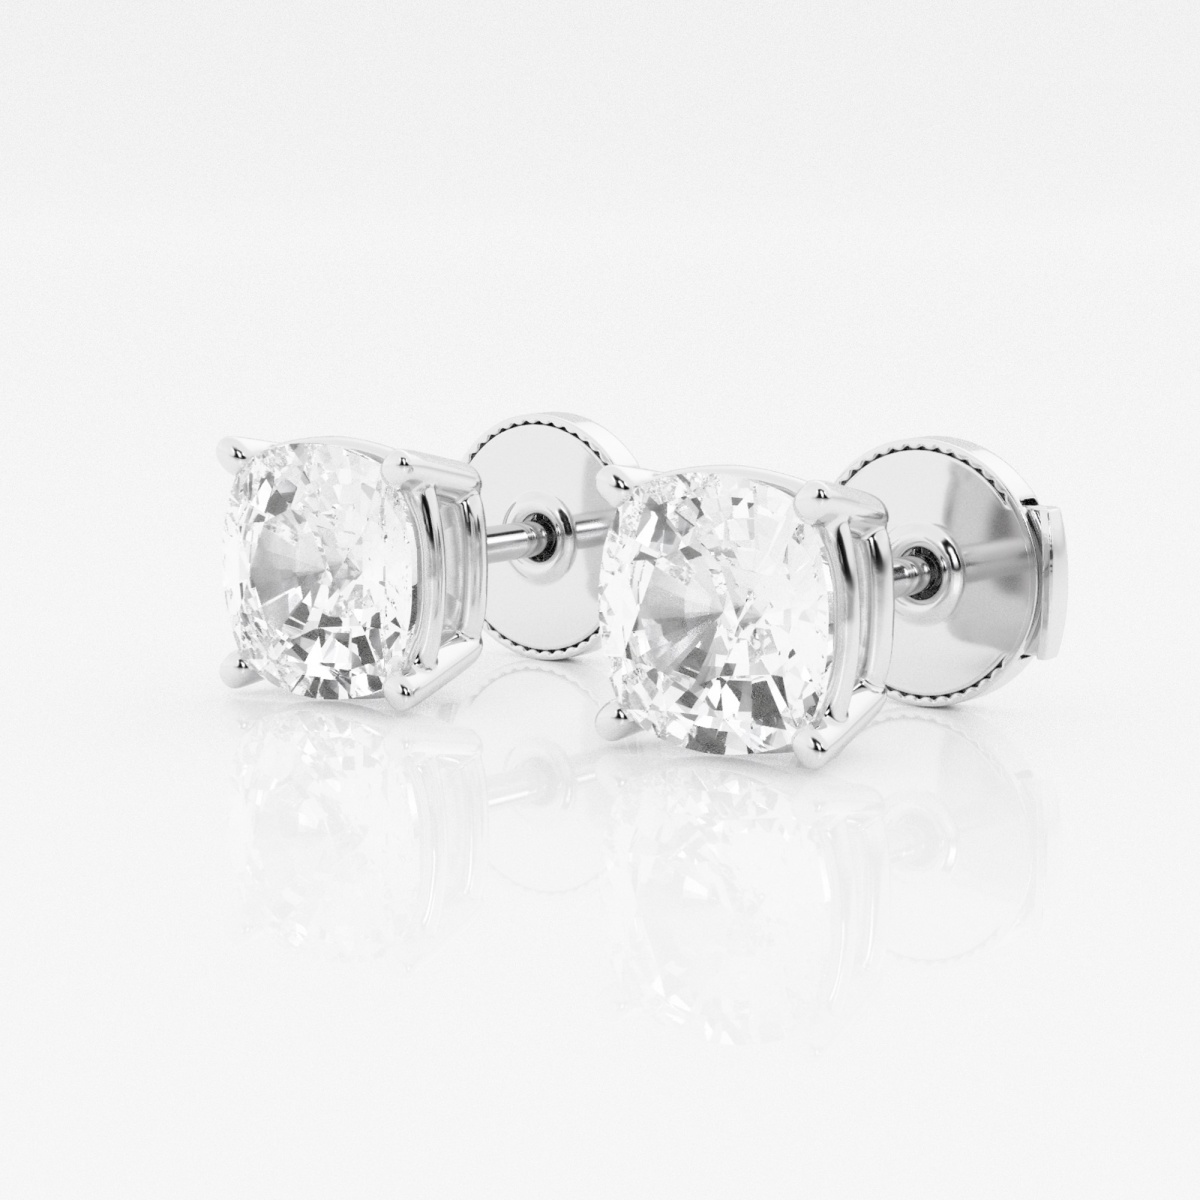 Additional Image 1 for  3 ctw Cushion Lab Grown Diamond Solitaire Certified Stud Earrings